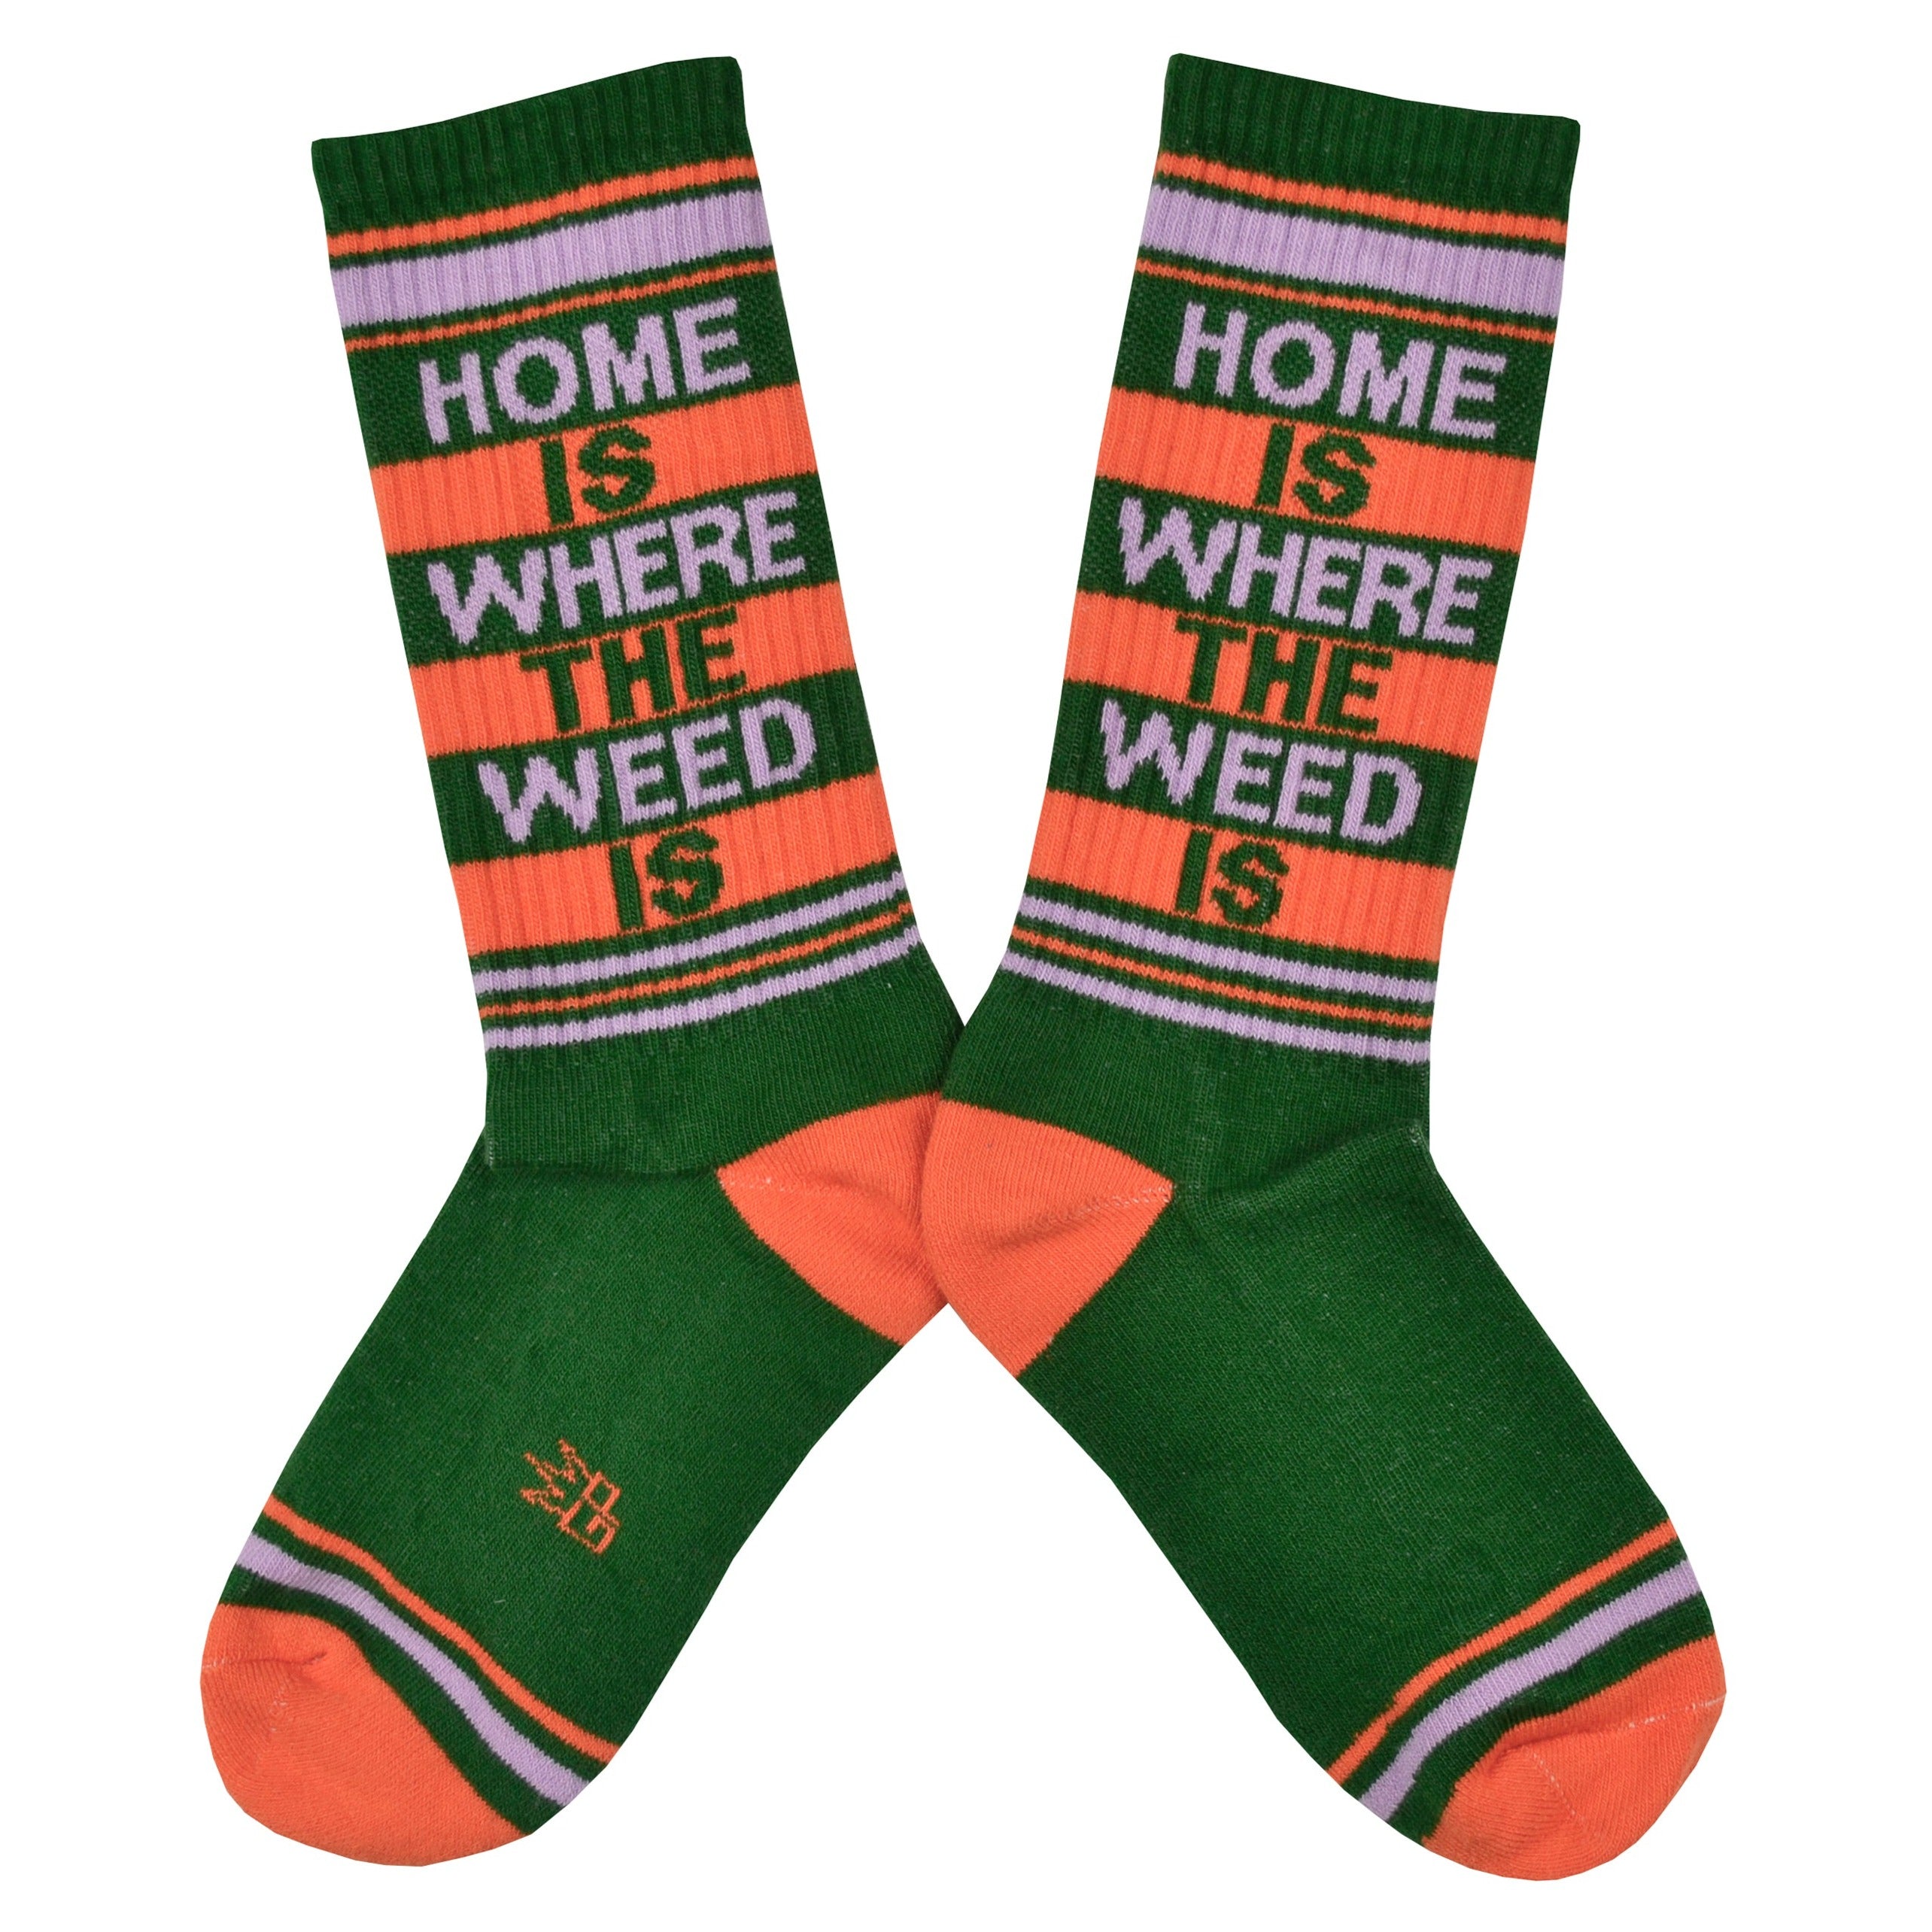 Shown in a flatlay, a pair of Gumball Poodle unisex cotton crew sock in green with an orange and green striped toe and cuff. The leg features the words, 